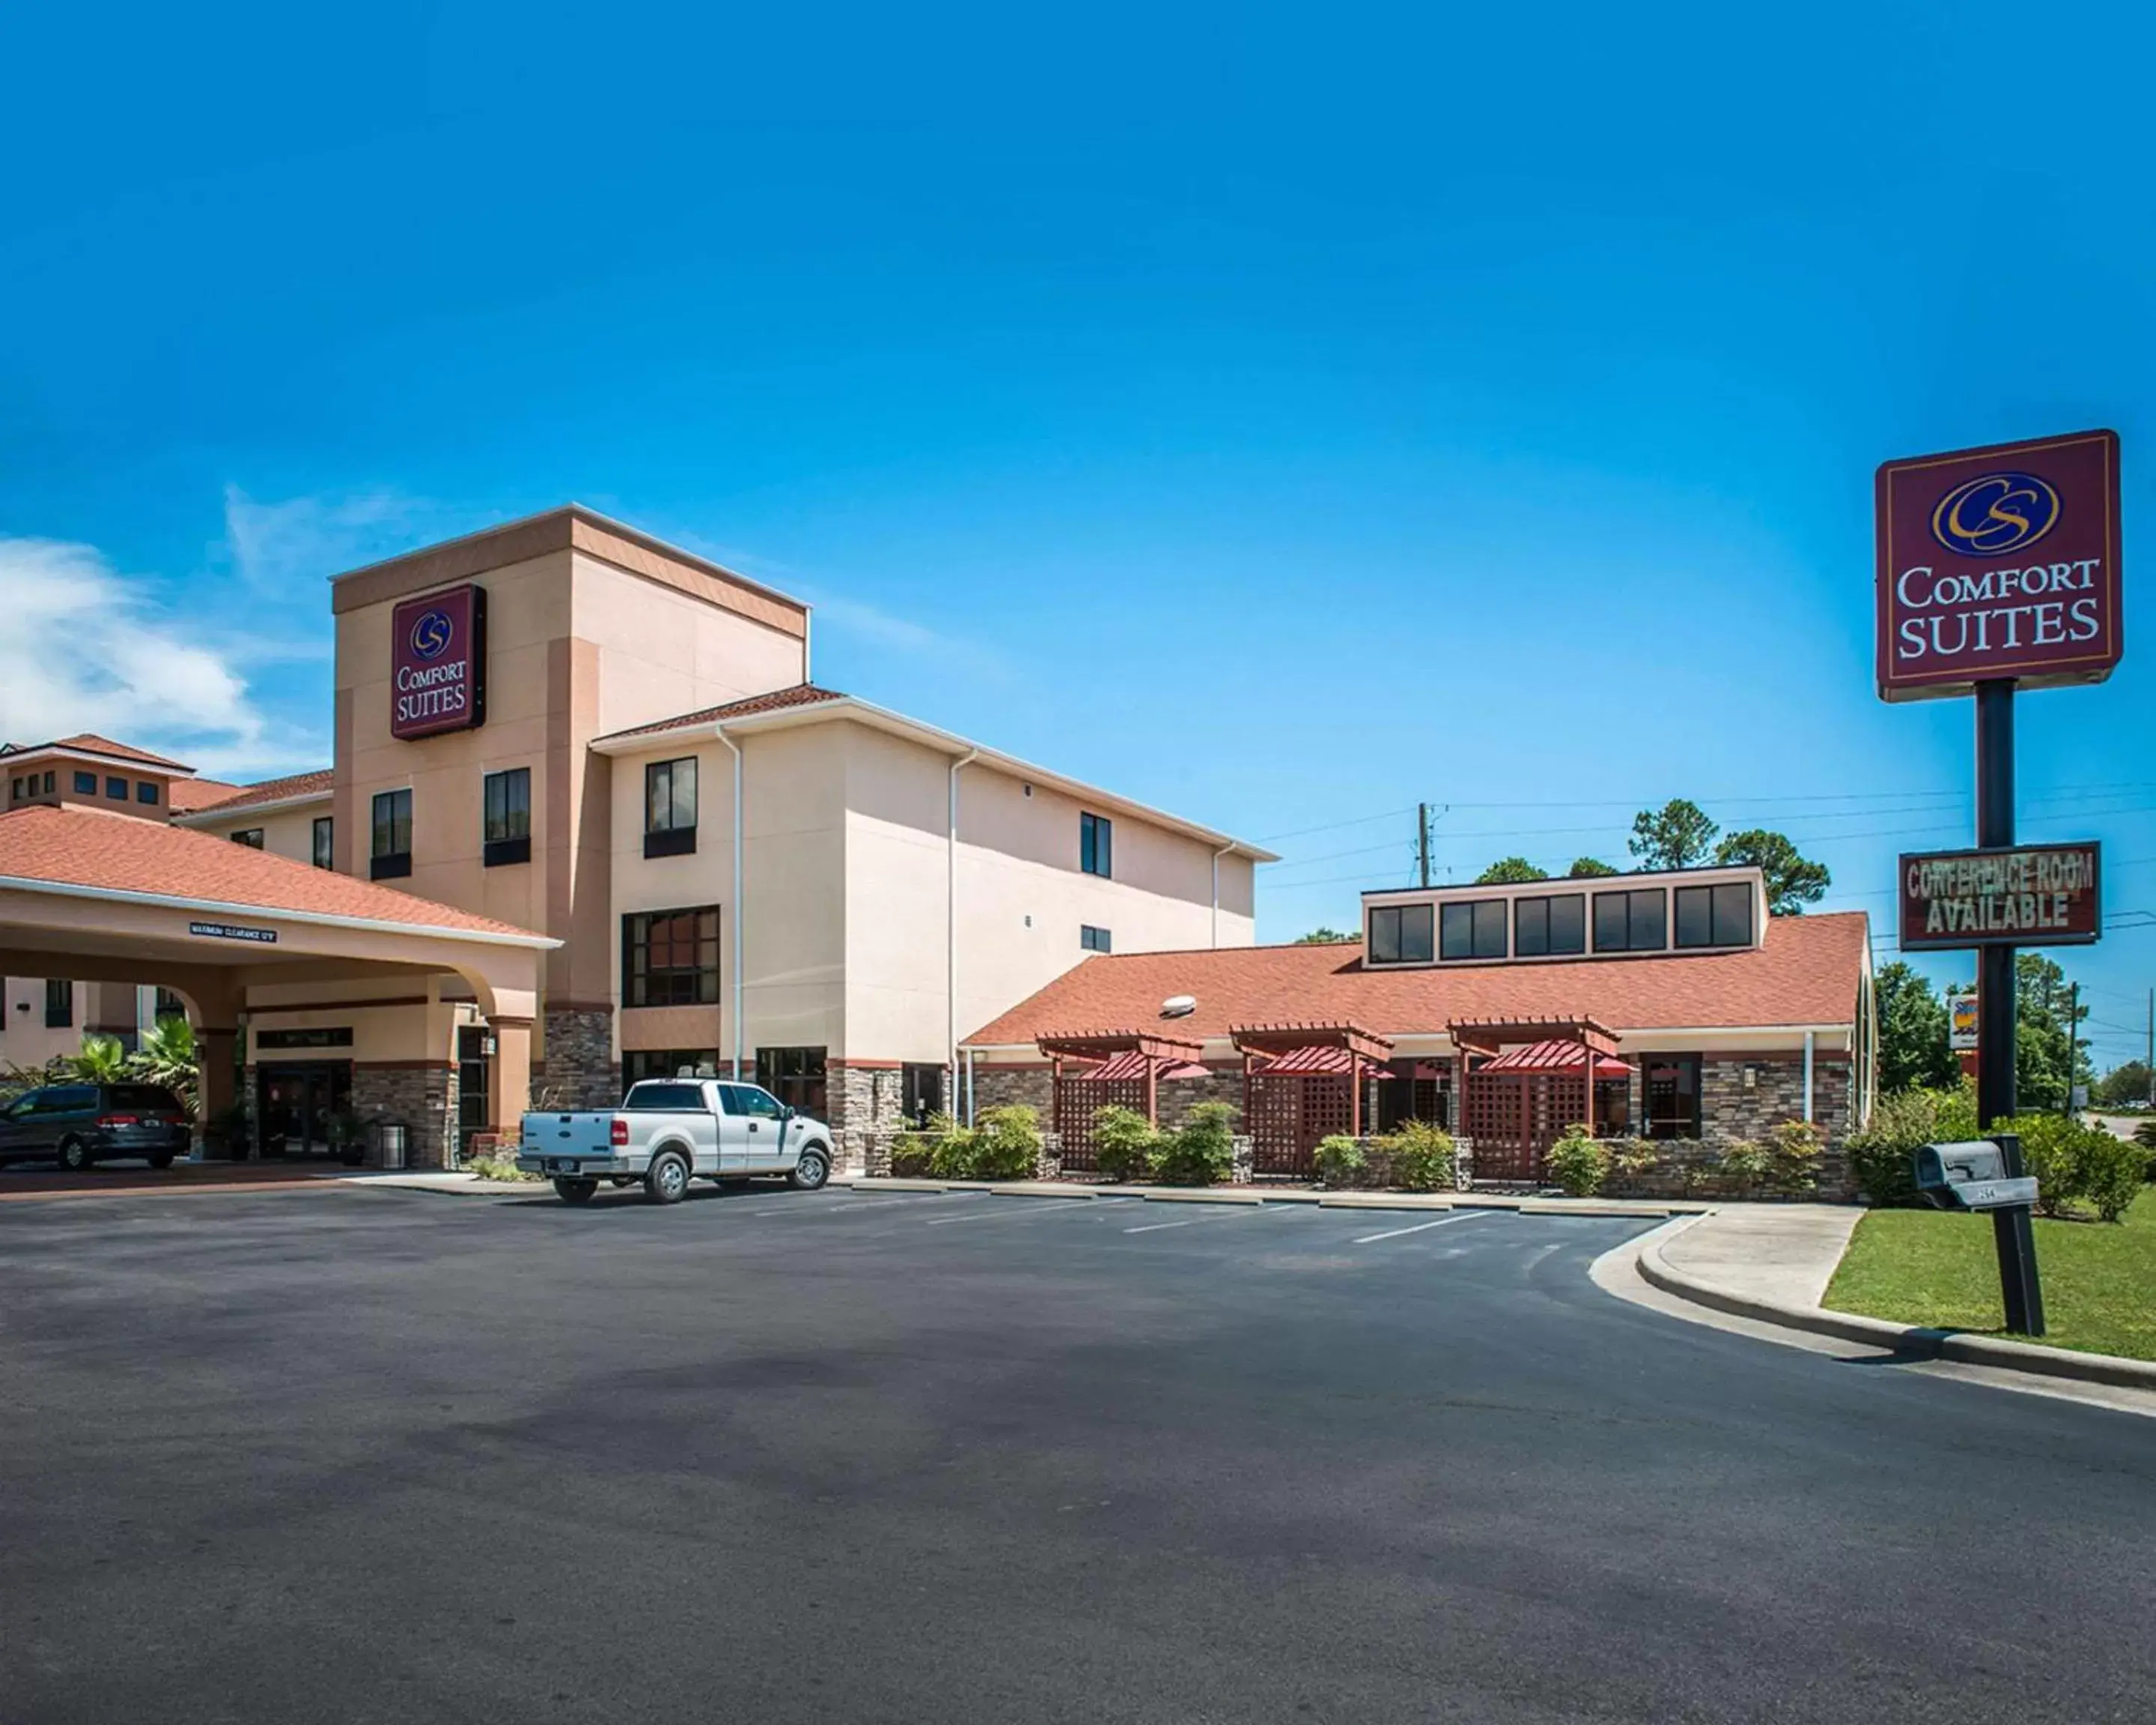 Property Building in Comfort Suites Panama City near Tyndall AFB